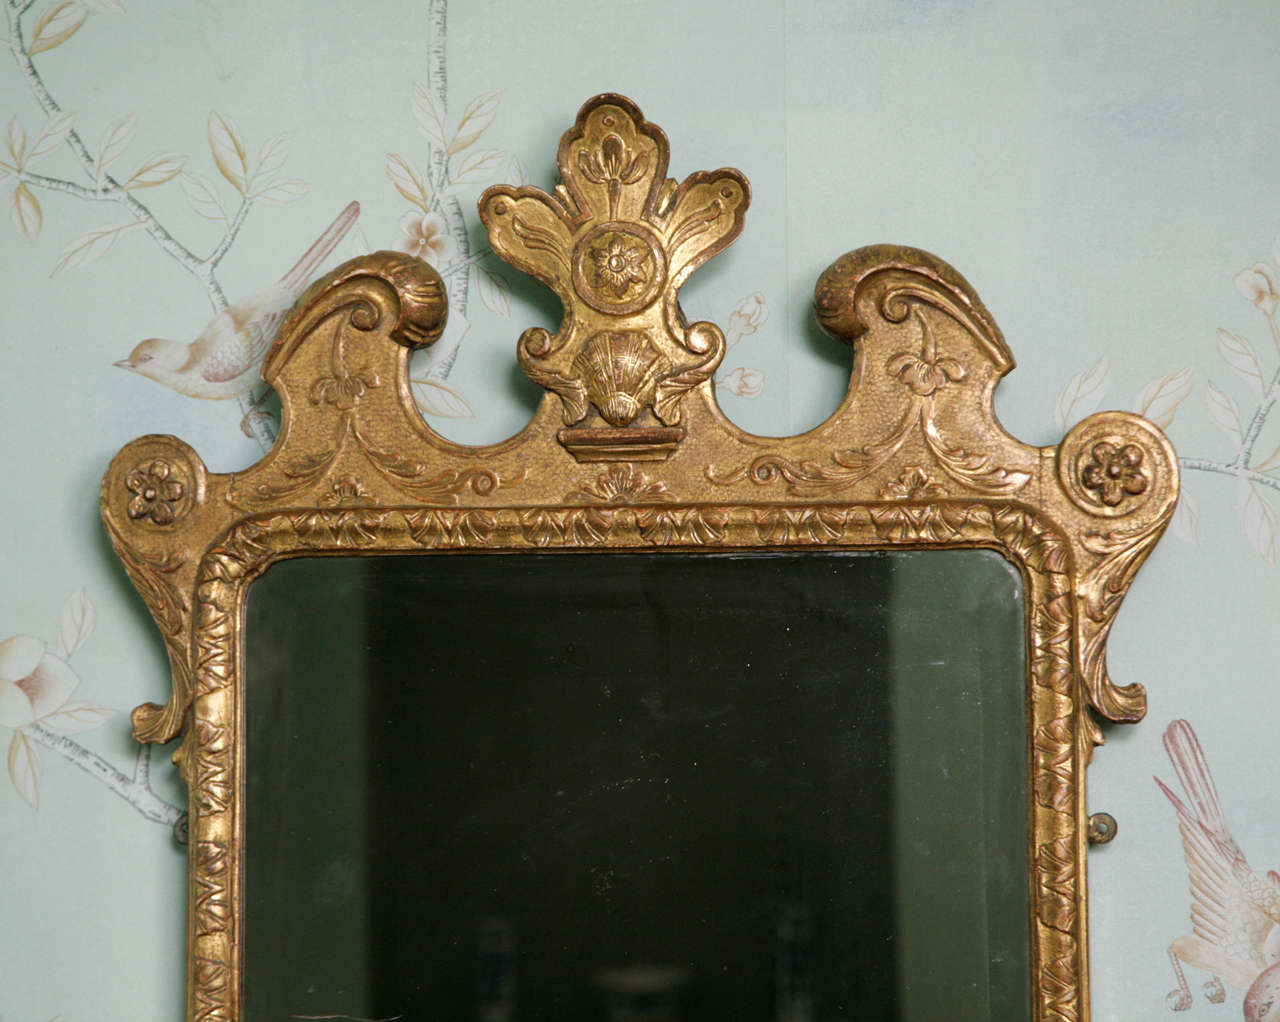 An charming early Georgian carved giltwood and gesso mirror with its original bevelled mirror plate set within a carved and moulded border. Further decorated with flower heads and scrolling foliate decoration on a punched ground centred by a